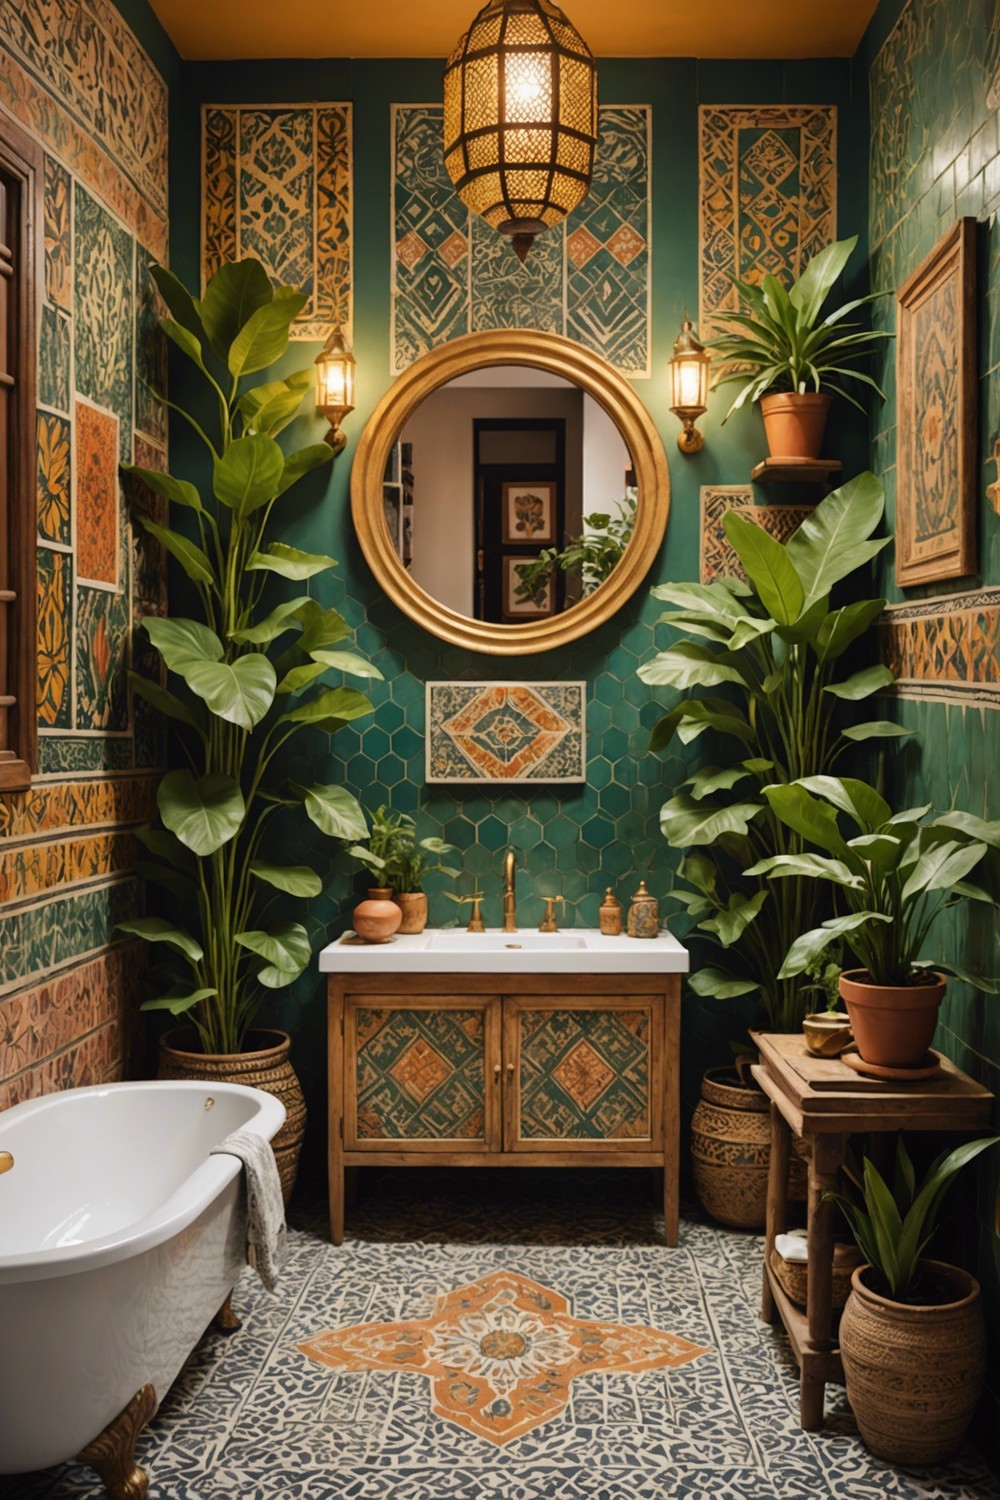 Boho Chic: Global-Inspired Patterns for a Free-Spirited Bathroom